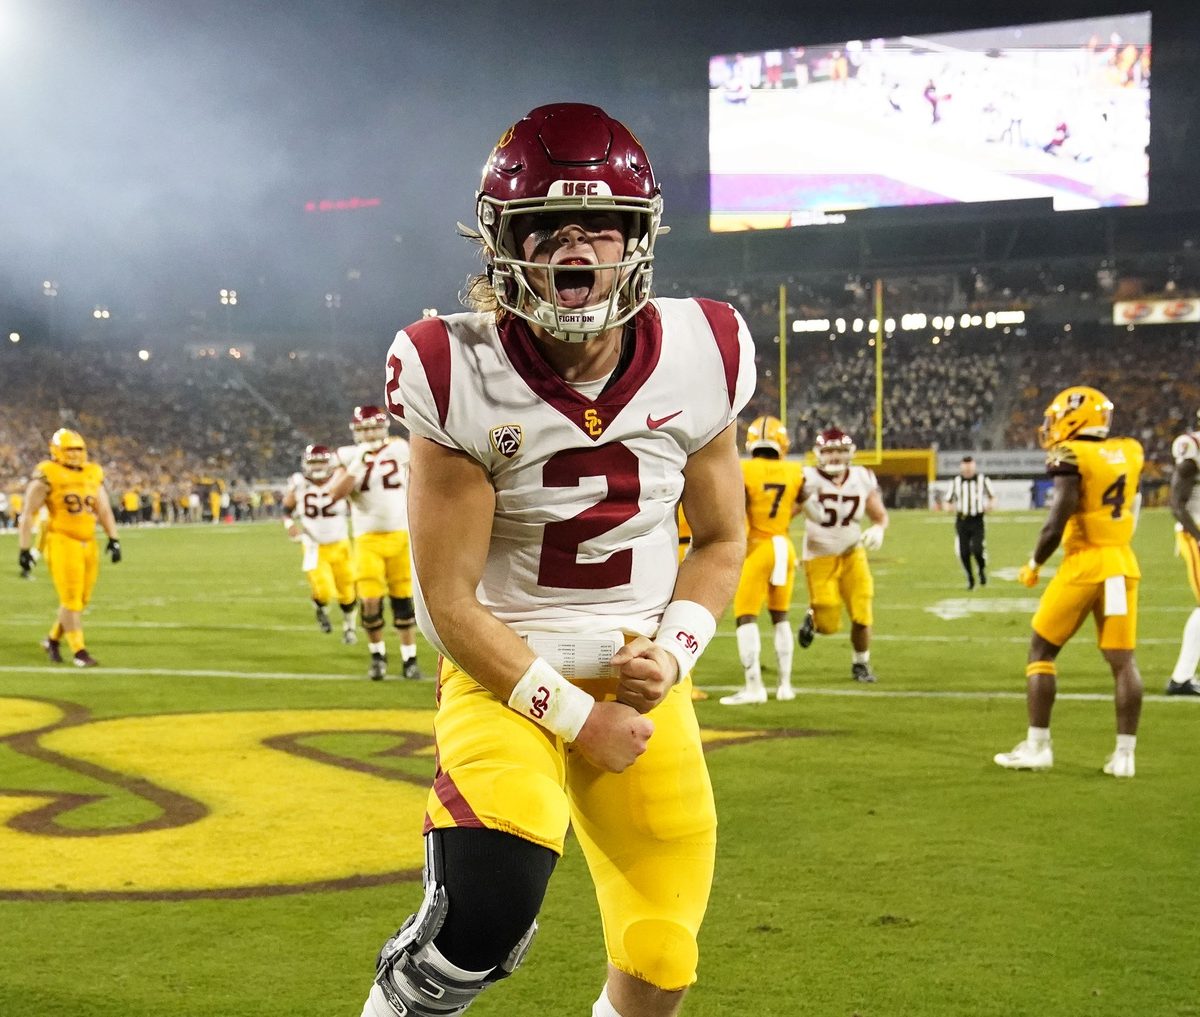 Rice vs. Southern California (USC) Prediction, Preview, and Odds - 9-3-2022